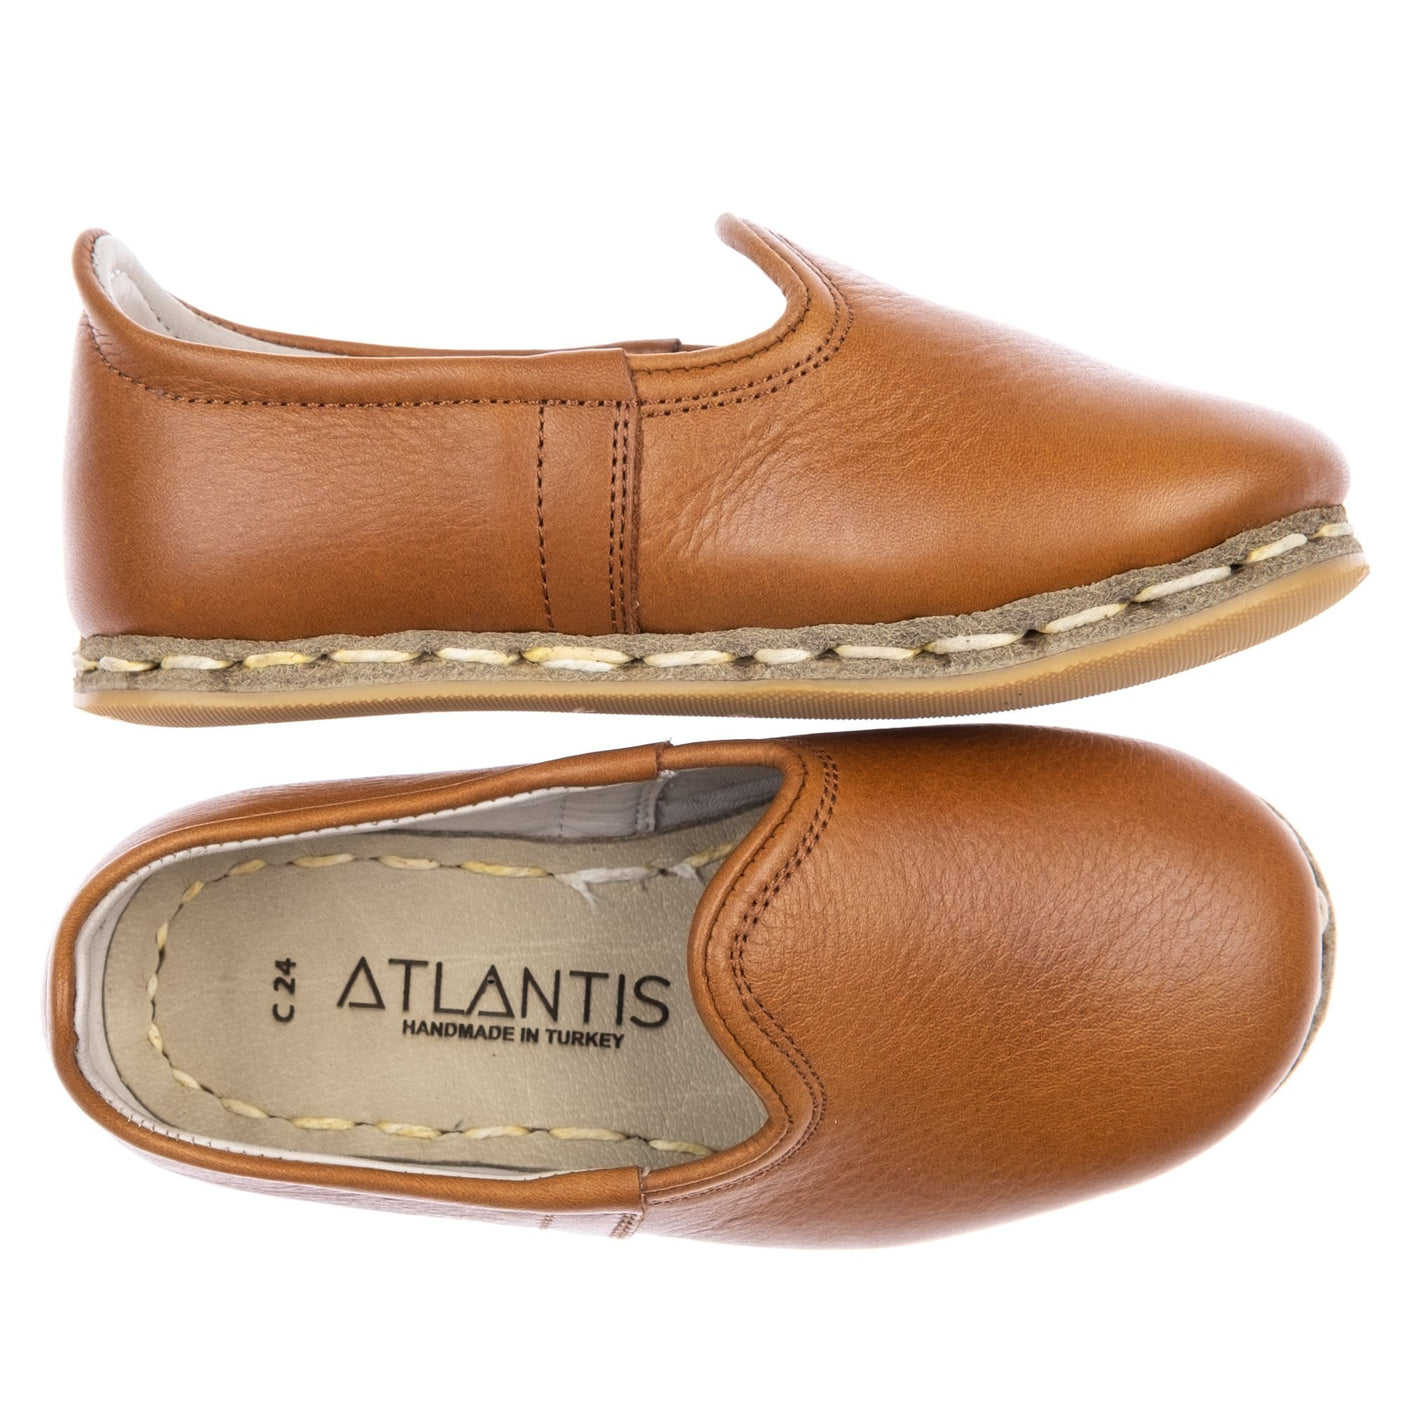 Kids Cocoa Brown Leather Shoes